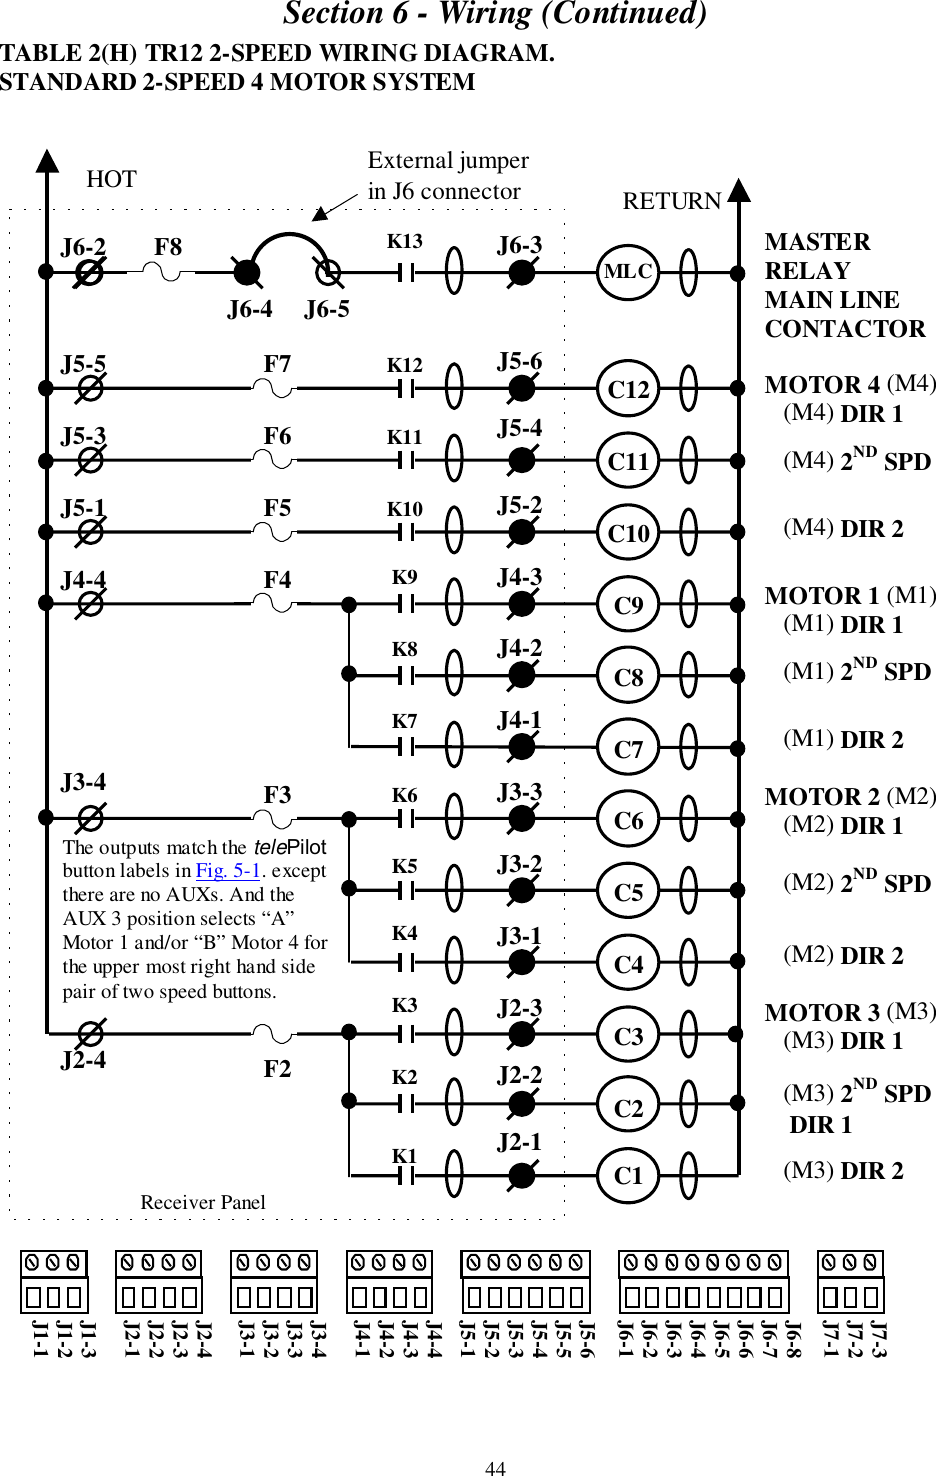 Section 6 - Wiring (Continued)44TABLE 2(H) TR12 2-SPEED WIRING DIAGRAM.STANDARD 2-SPEED 4 MOTOR SYSTEMMASTERRELAYMAIN LINECONTACTORMOTOR 4 (M4)   (M4) DIR 1   (M4) 2ND SPD            (M4) DIR 2MOTOR 1 (M1)   (M1) DIR 1   (M1) 2ND SPD   (M1) DIR 2MOTOR 2 (M2)   (M2) DIR 1   (M2) 2ND SPD   (M2) DIR 2MOTOR 3 (M3)   (M3) DIR 1   (M3) 2ND SPD    DIR 1   (M3) DIR 2     Receiver PanelJ6-2J5-5J5-3J5-1J4-4J3-4J2-4J6-3J5-6J5-4J5-2J4-3J4-2J4-1J3-3J3-2J3-1J2-3J2-2J2-1HOT RETURNK13K12K11K10K9K8K7K6K5K4K3K2K1MLCC12C11C10C9C8C7C6C5C4C3C2C1F7F6F5F4F3F2J7-3J7-2J7-1J6-8J6-7J6-6J6-5J6-4J6-3J6-2J6-1J5-6J5-5J5-4J5-3J5-2J5-1J4-4J4-3J4-2J4-1J3-4J3-3J3-2J3-1J2-4J2-3J2-2J2-1J1-3J1-2J1-1External jumperin J6 connectorJ6-4     J6-5F8The outputs match the telePilotbutton labels in Fig. 5-1. exceptthere are no AUXs. And theAUX 3 position selects “A”Motor 1 and/or “B” Motor 4 forthe upper most right hand sidepair of two speed buttons.